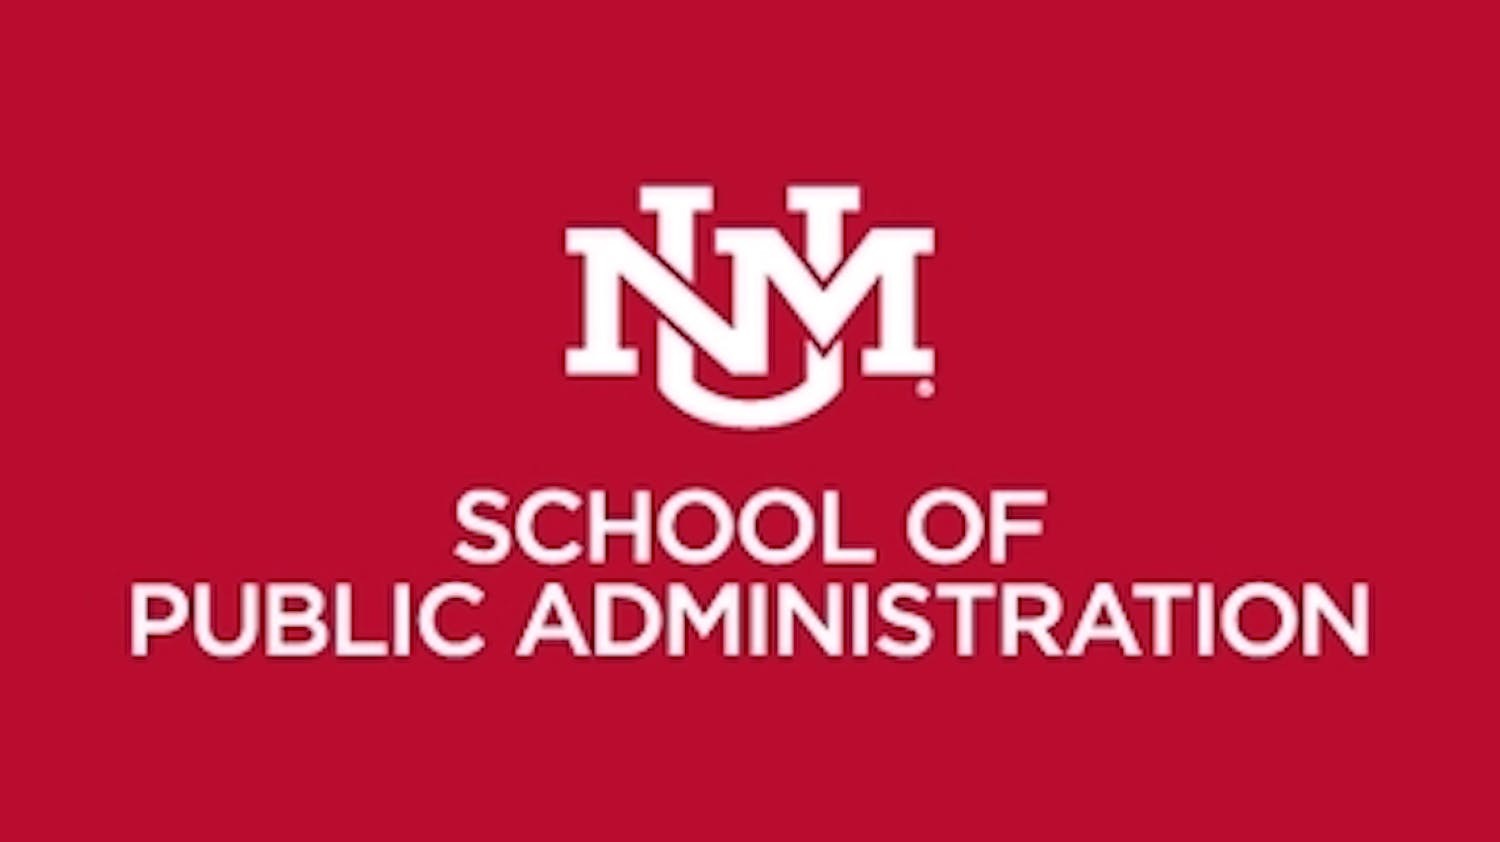 University of New Mexico School of Public Administration